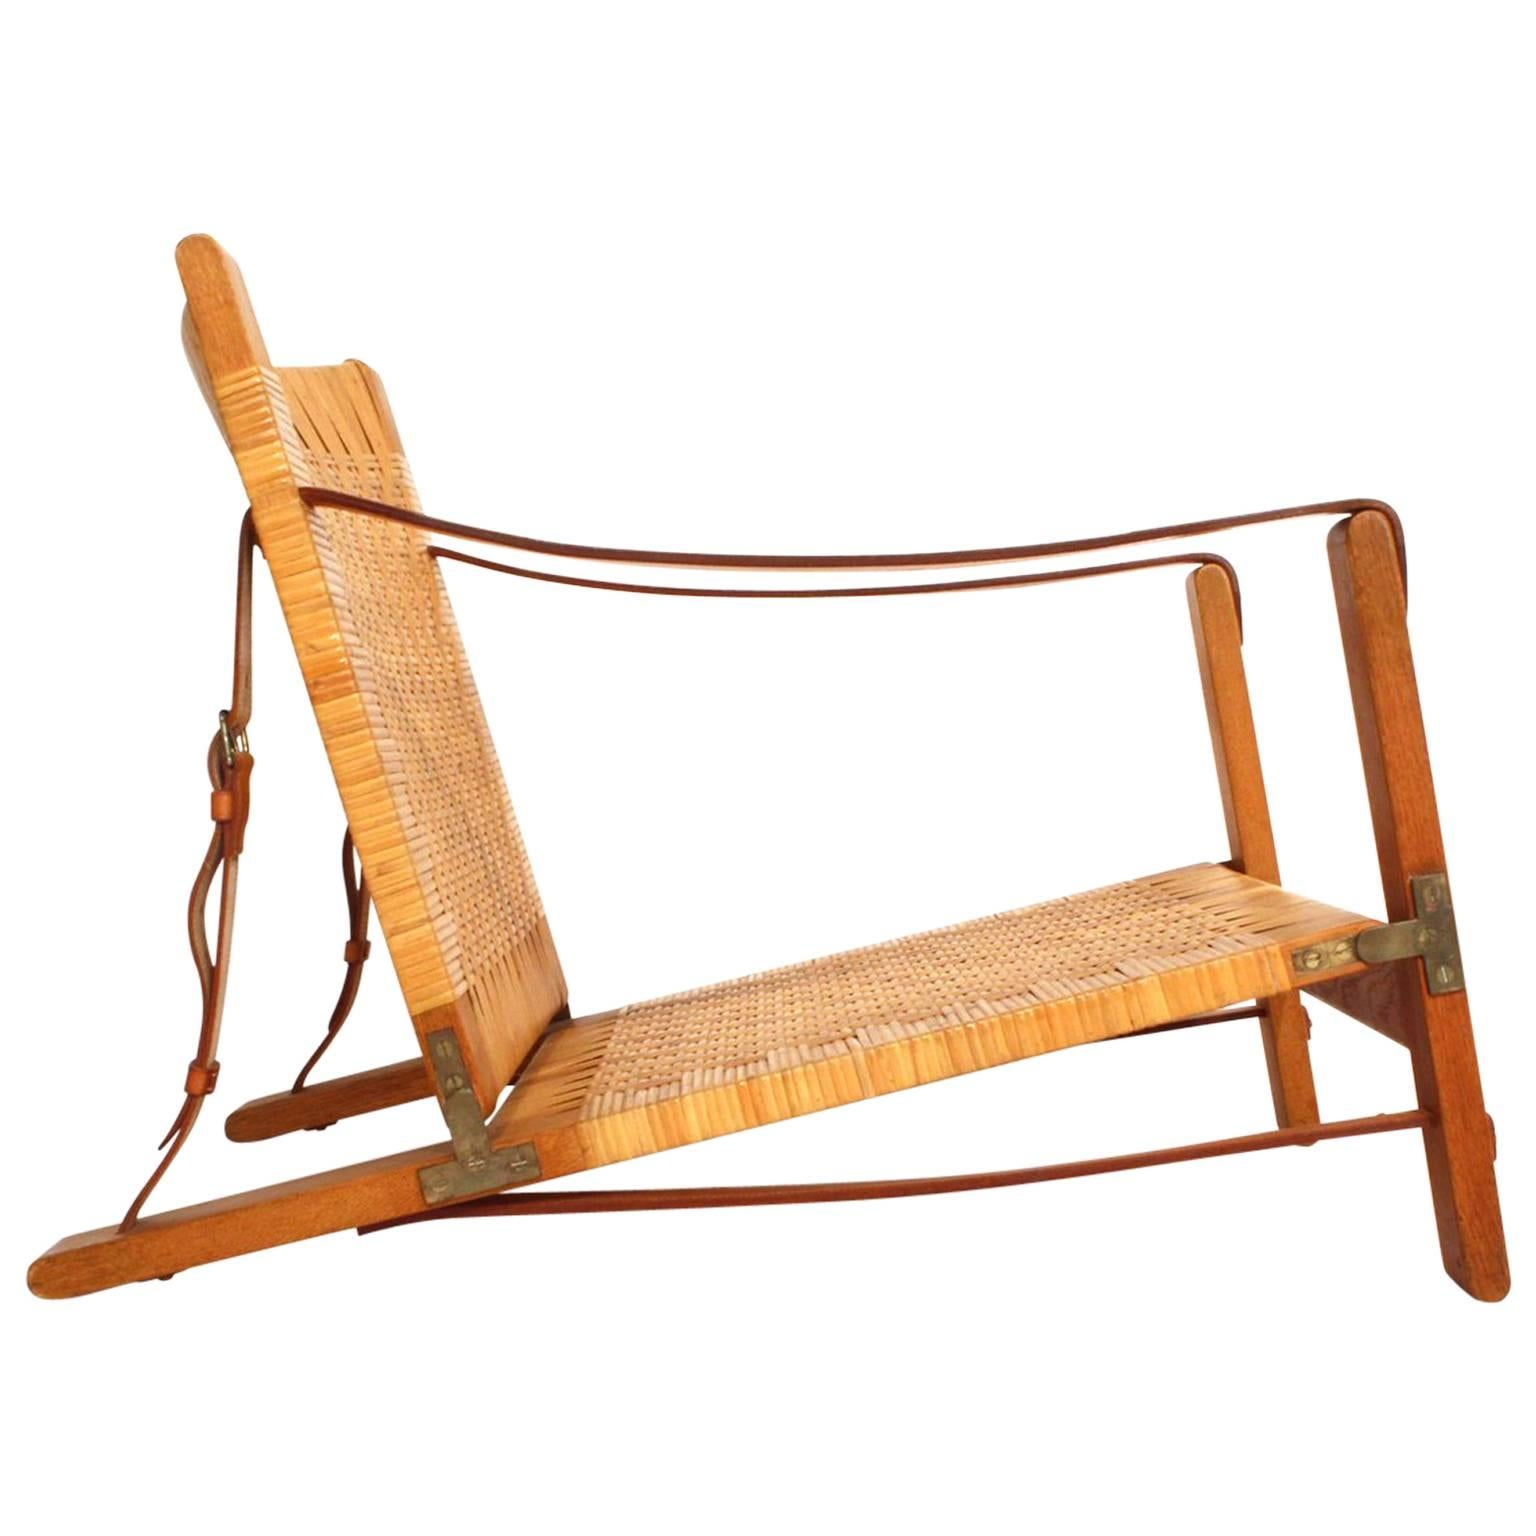 Extremely Rare Børge Mogensen Hunting Chair by Cabinetmaker Erhard Rasmussen For Sale